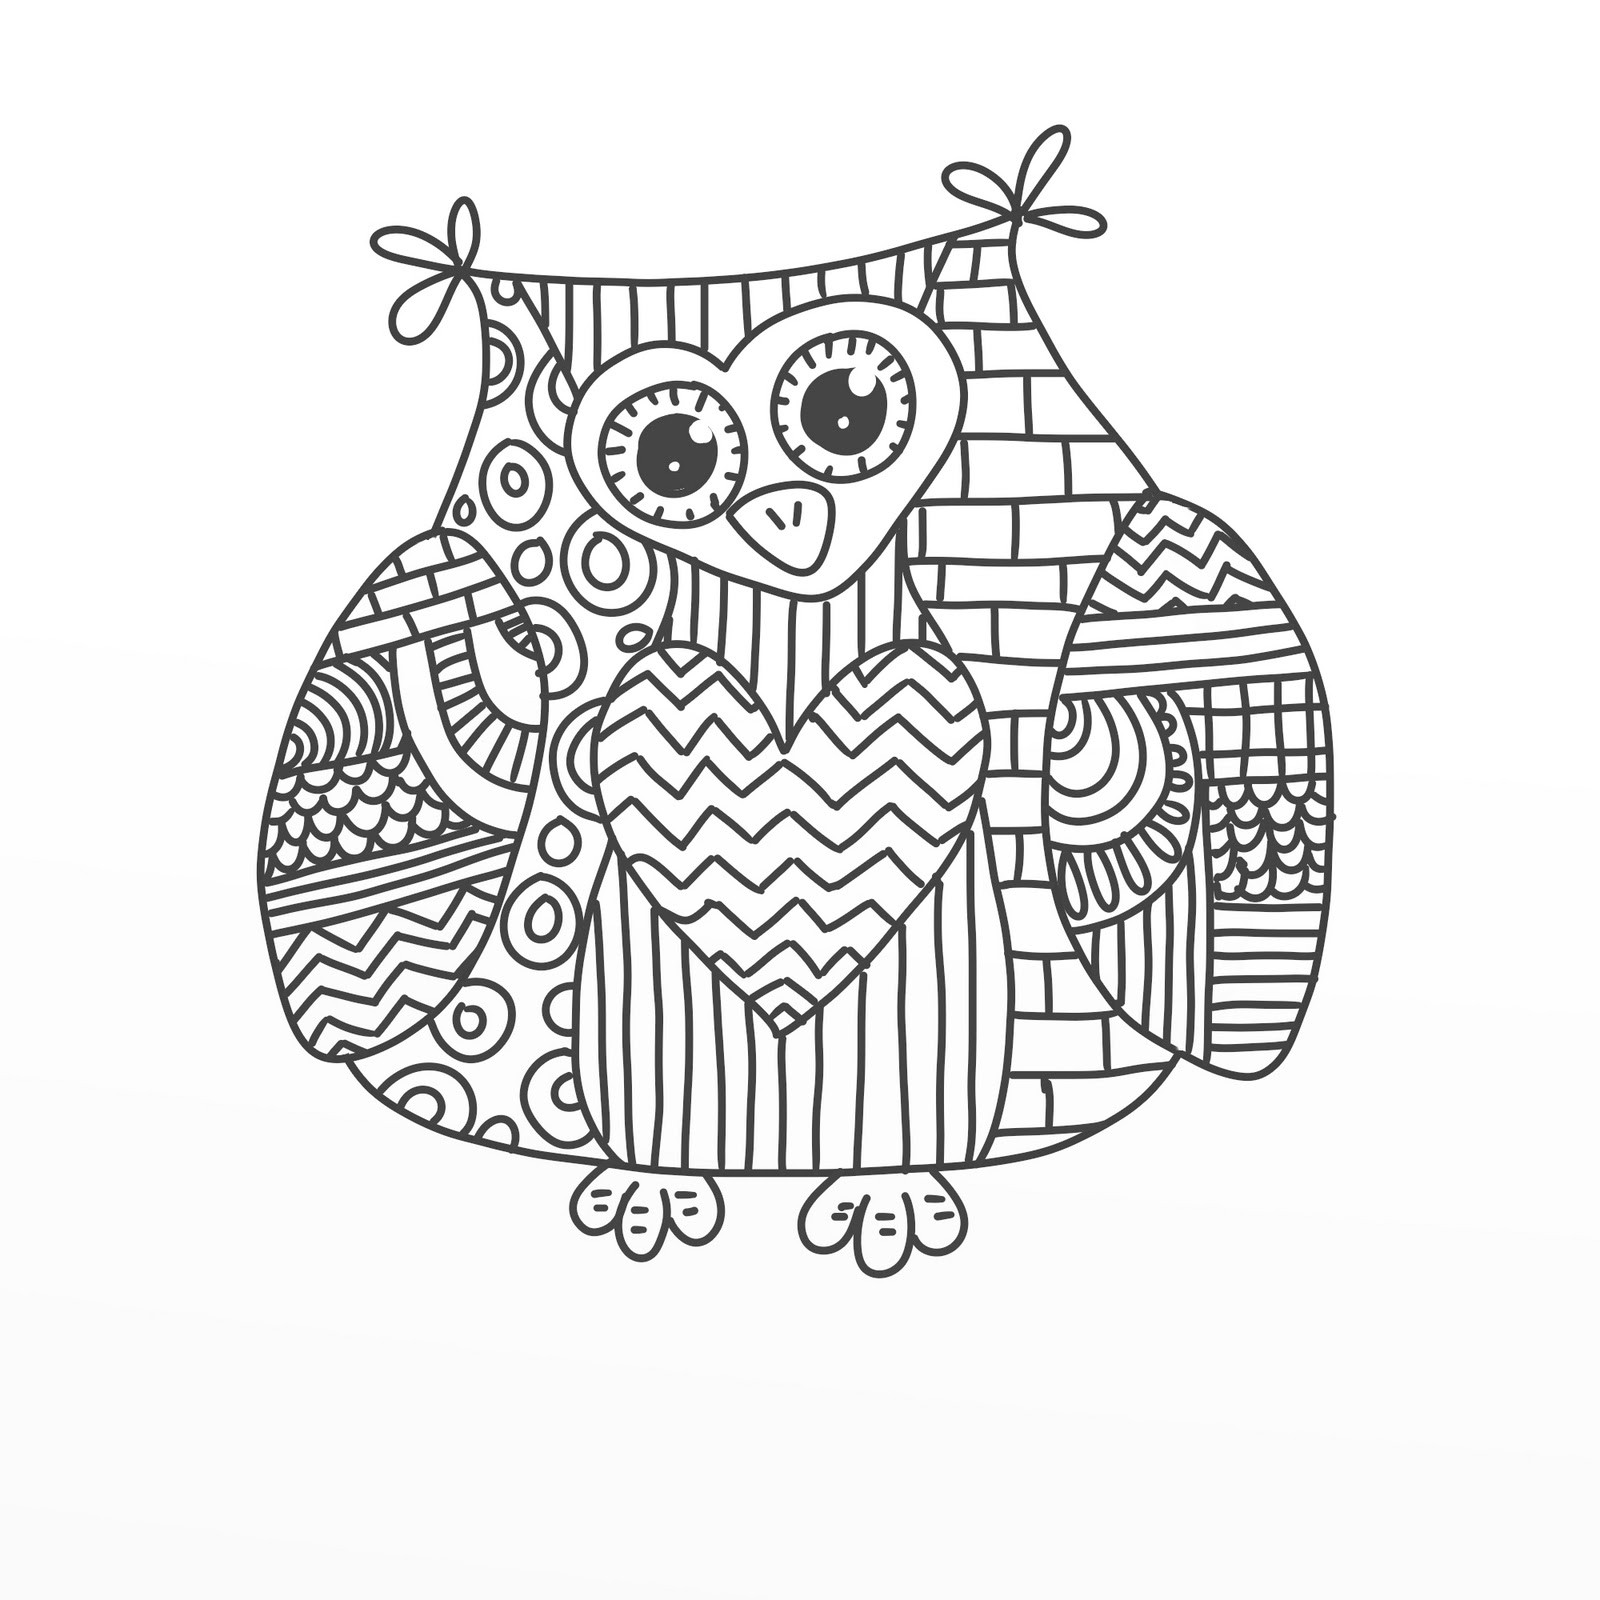 Owl Coloring Book Pages
 Free Owl Coloring Pages Image 8 Animal Category